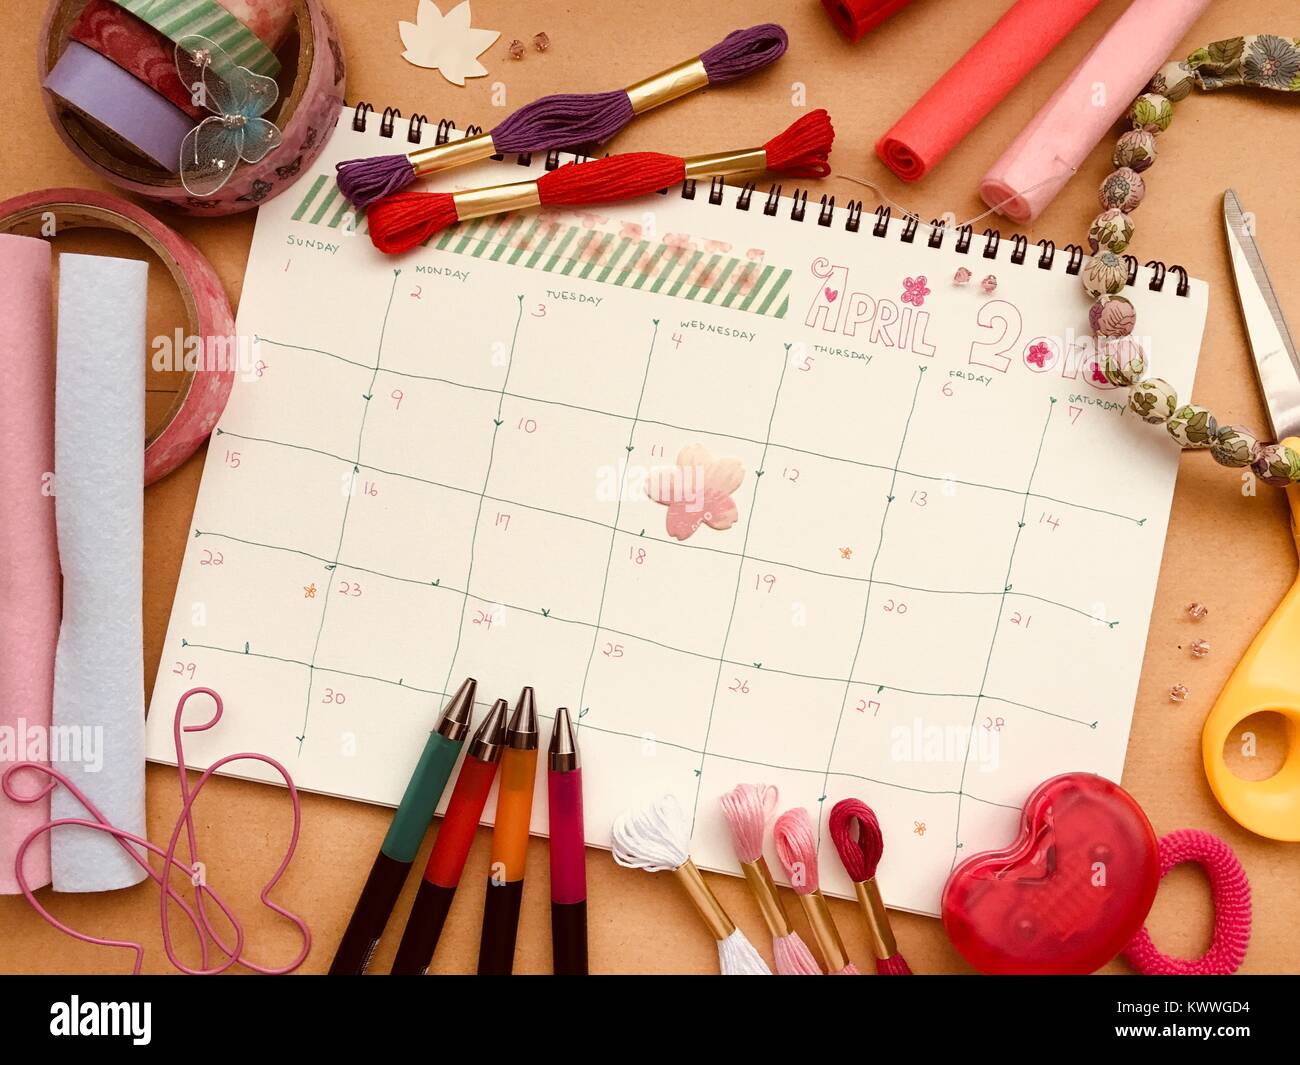 2018 April spring calendar flat lay with stationary, craft tools and materials. Stock Photo